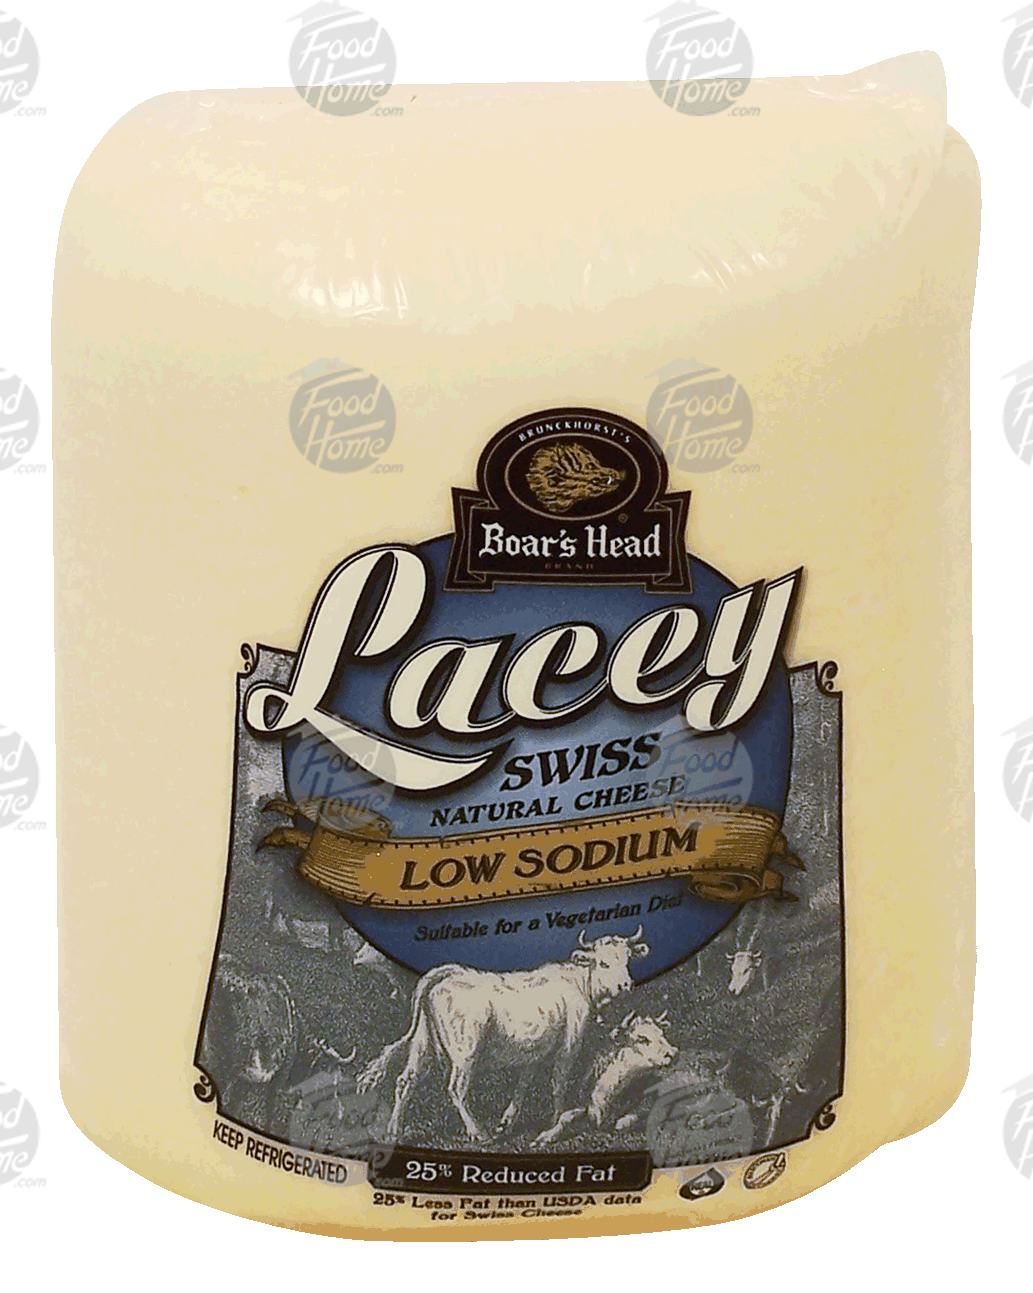 Boar's Head Lacey swiss cheese, low sodium, 25% reduced fat Full-Size Picture